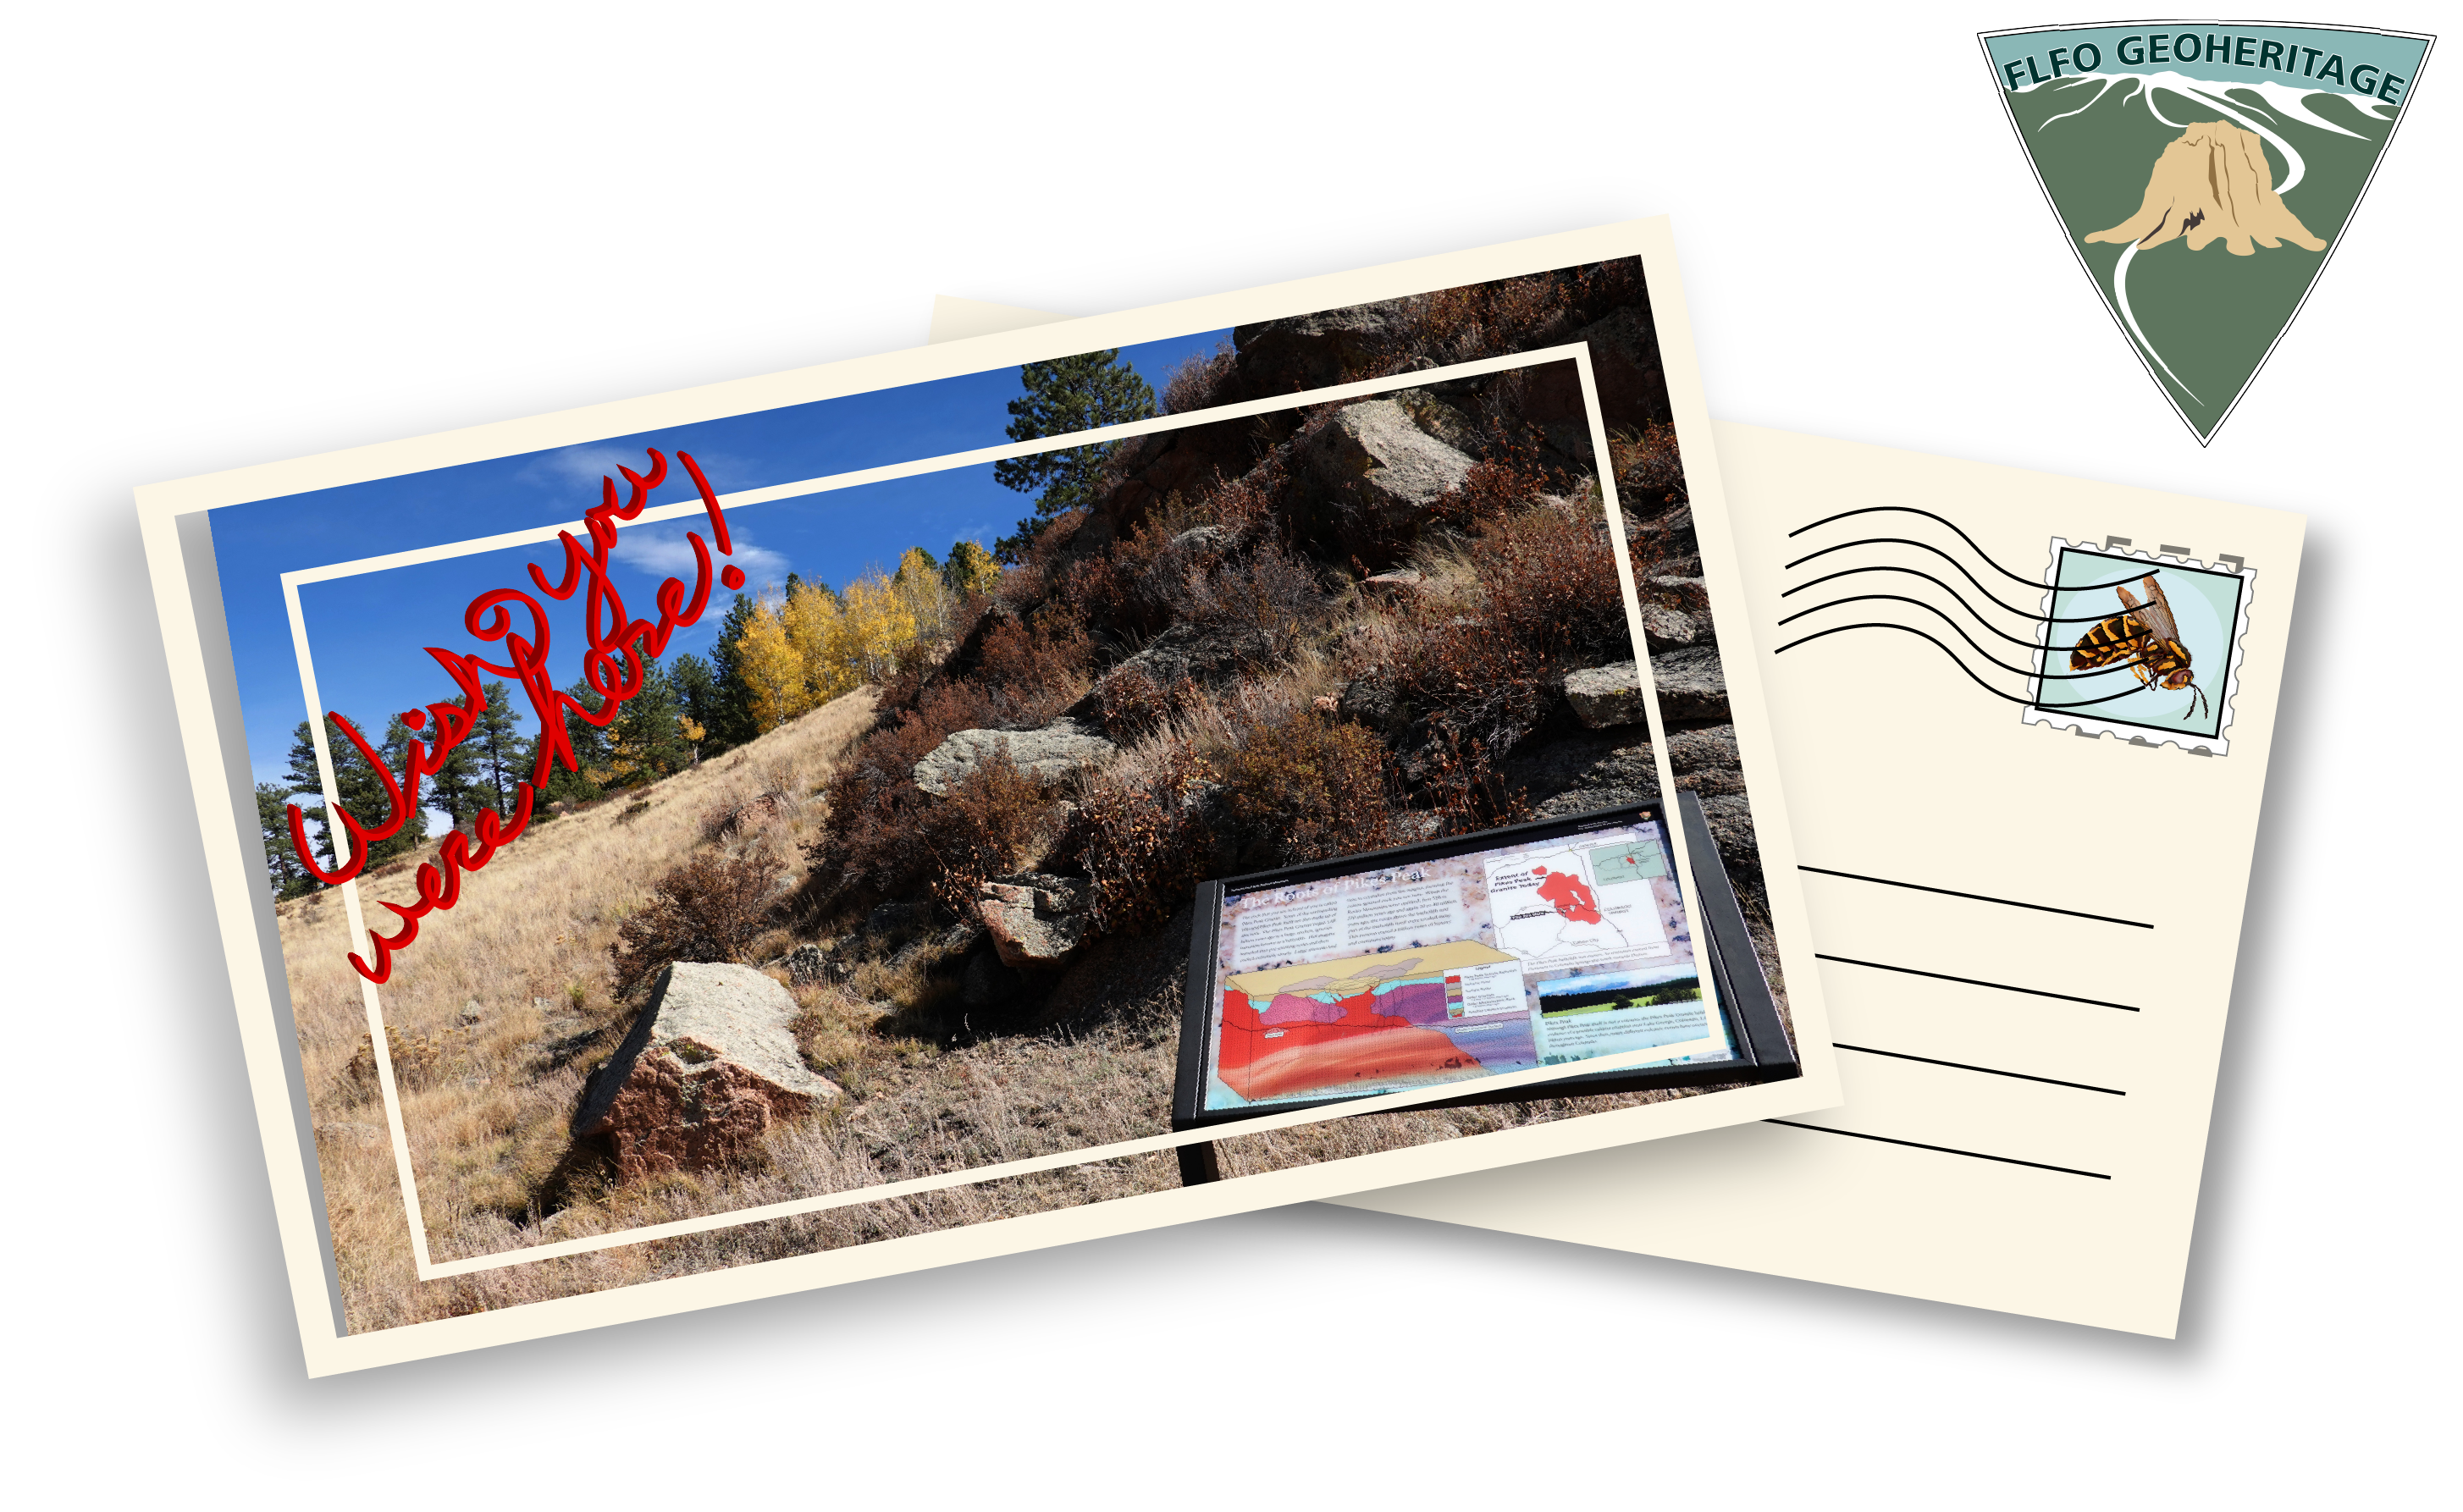 Illustration of a post card with photograph of a rocky hillside and a wayside in the lower right corner, in the upper left corner are the words "wish you were here" written in red.